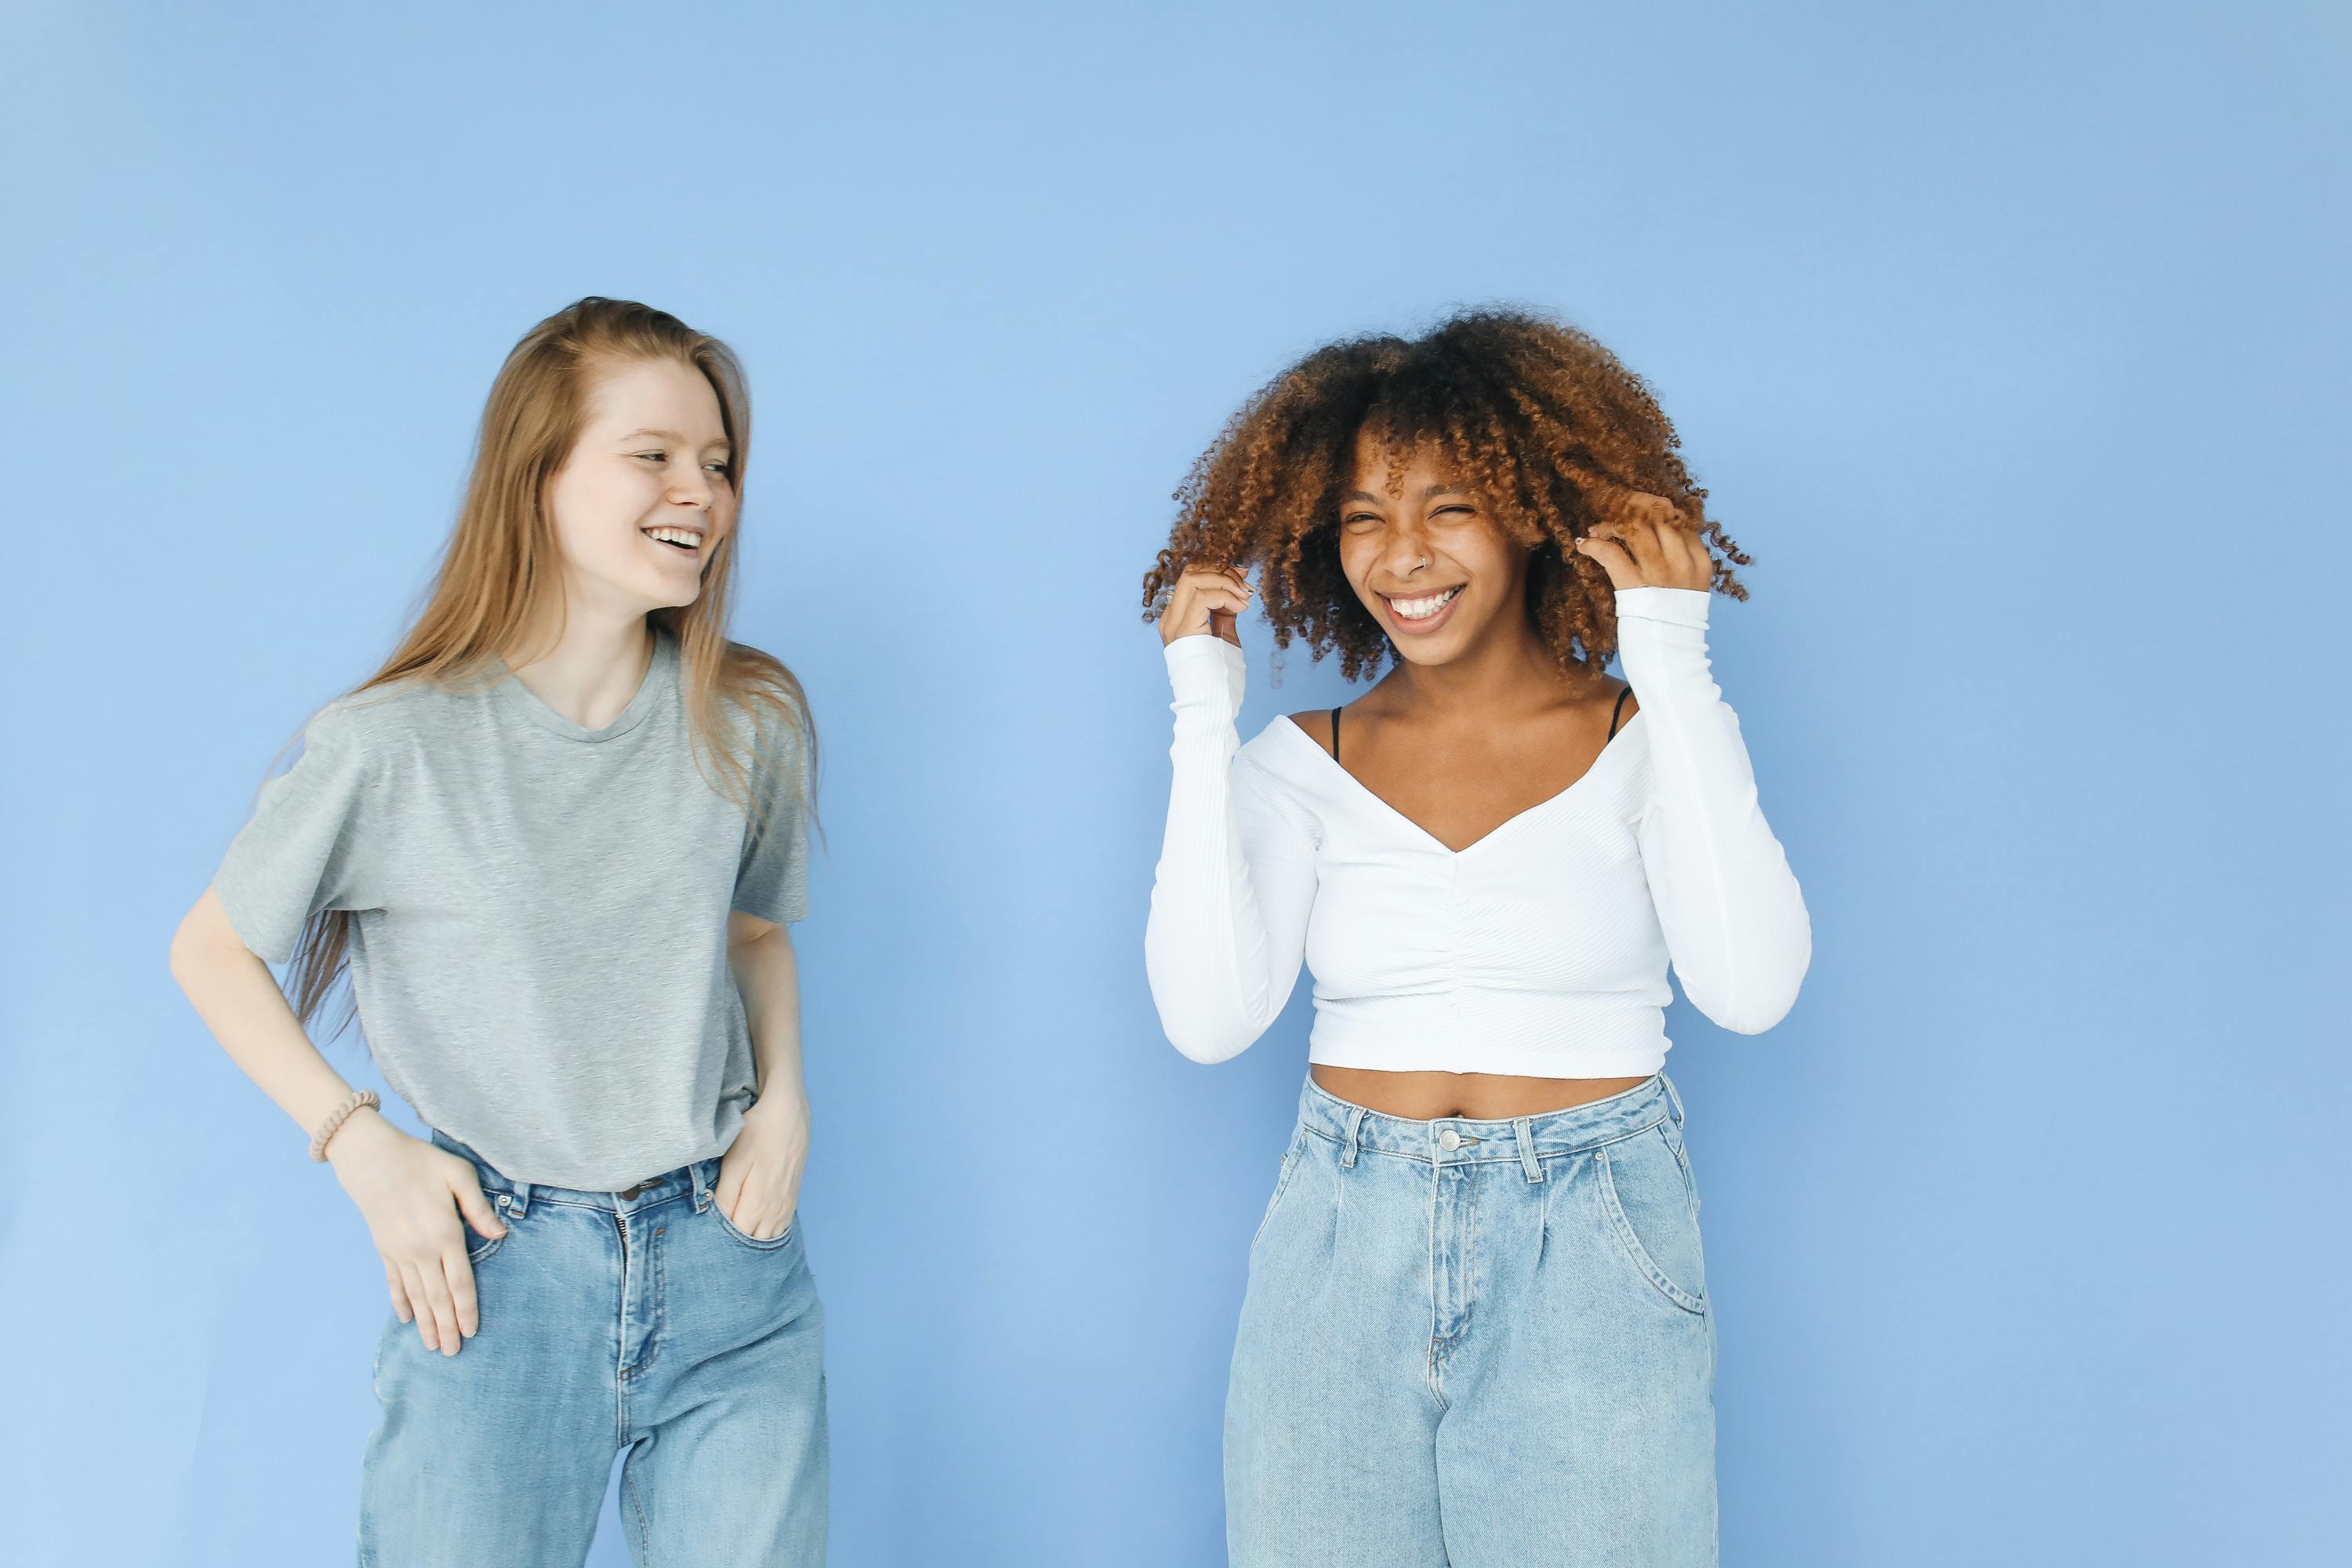 Women in Denim Jeans Laughing · Free Stock Photo